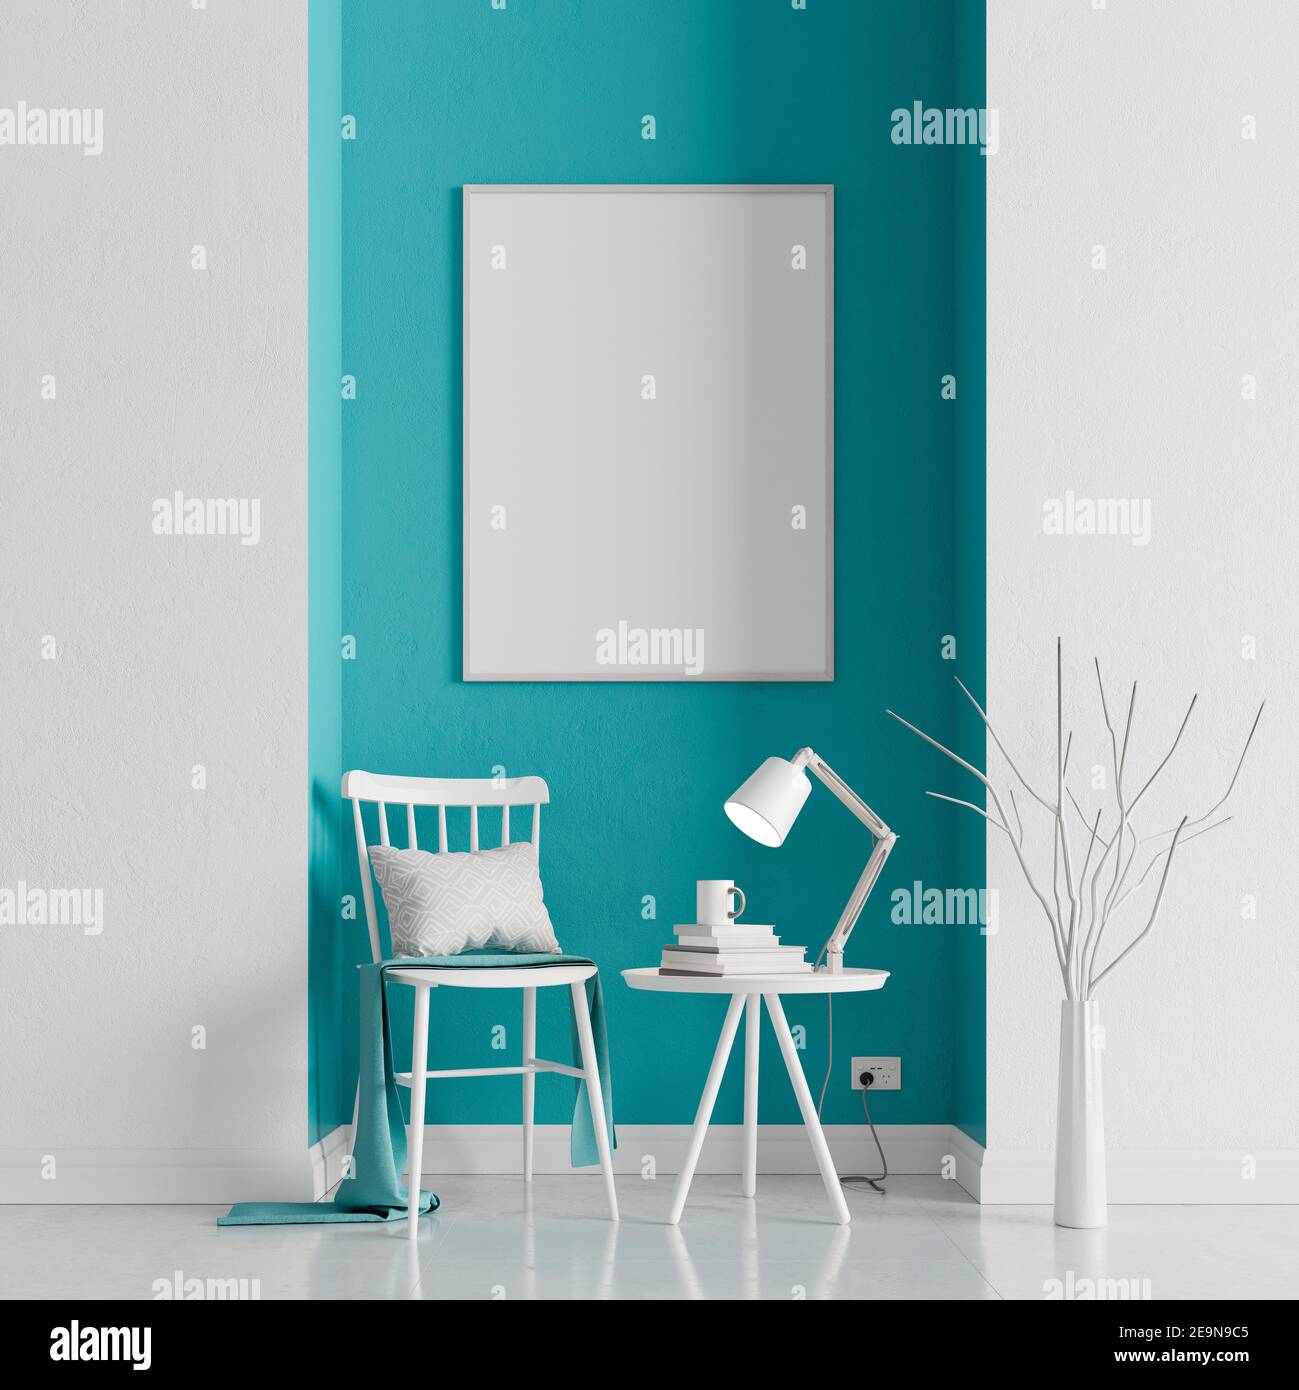 White and blue concrete wall with white furniture, minimal interior design, 3d render 3d illustration Stock Photo